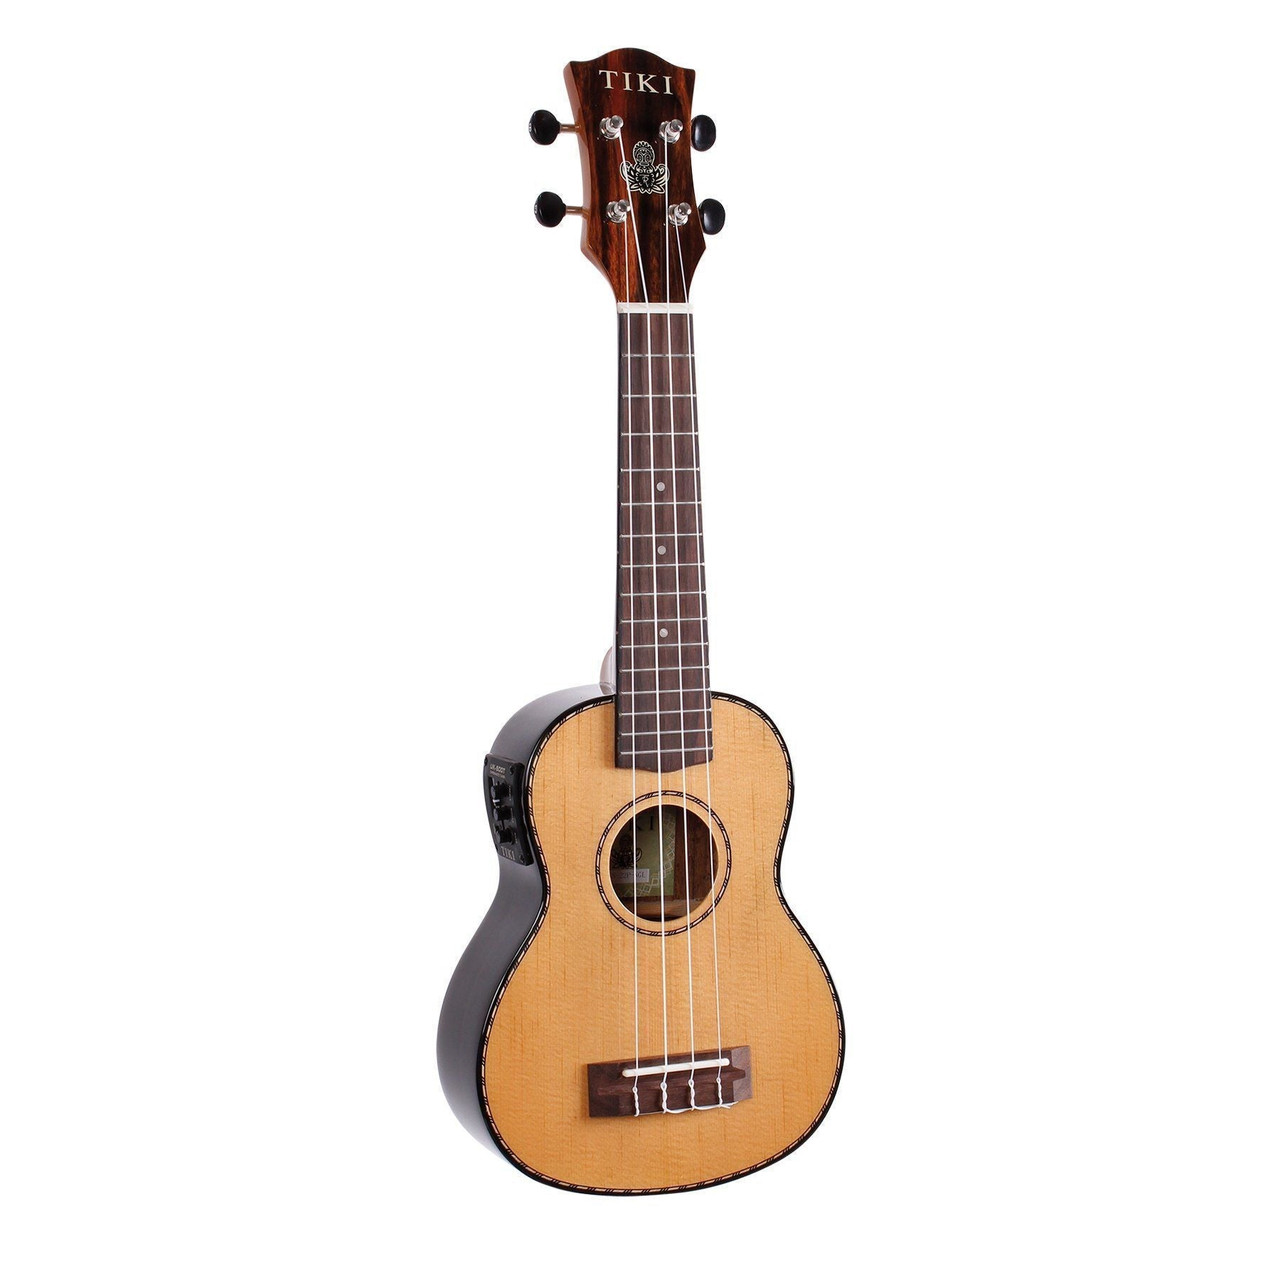 https://cdn.shopify.com/s/files/1/1636/6967/products/Tiki-22-Series-Spruce-Solid-Top-Electric-Soprano-Ukulele-with-Hard-Case-Natural-Gloss-TSS-22P-NGL-3_6bcf6450-9ea8-4928-8d85-ae107421c78e.jpg?v=1643136680